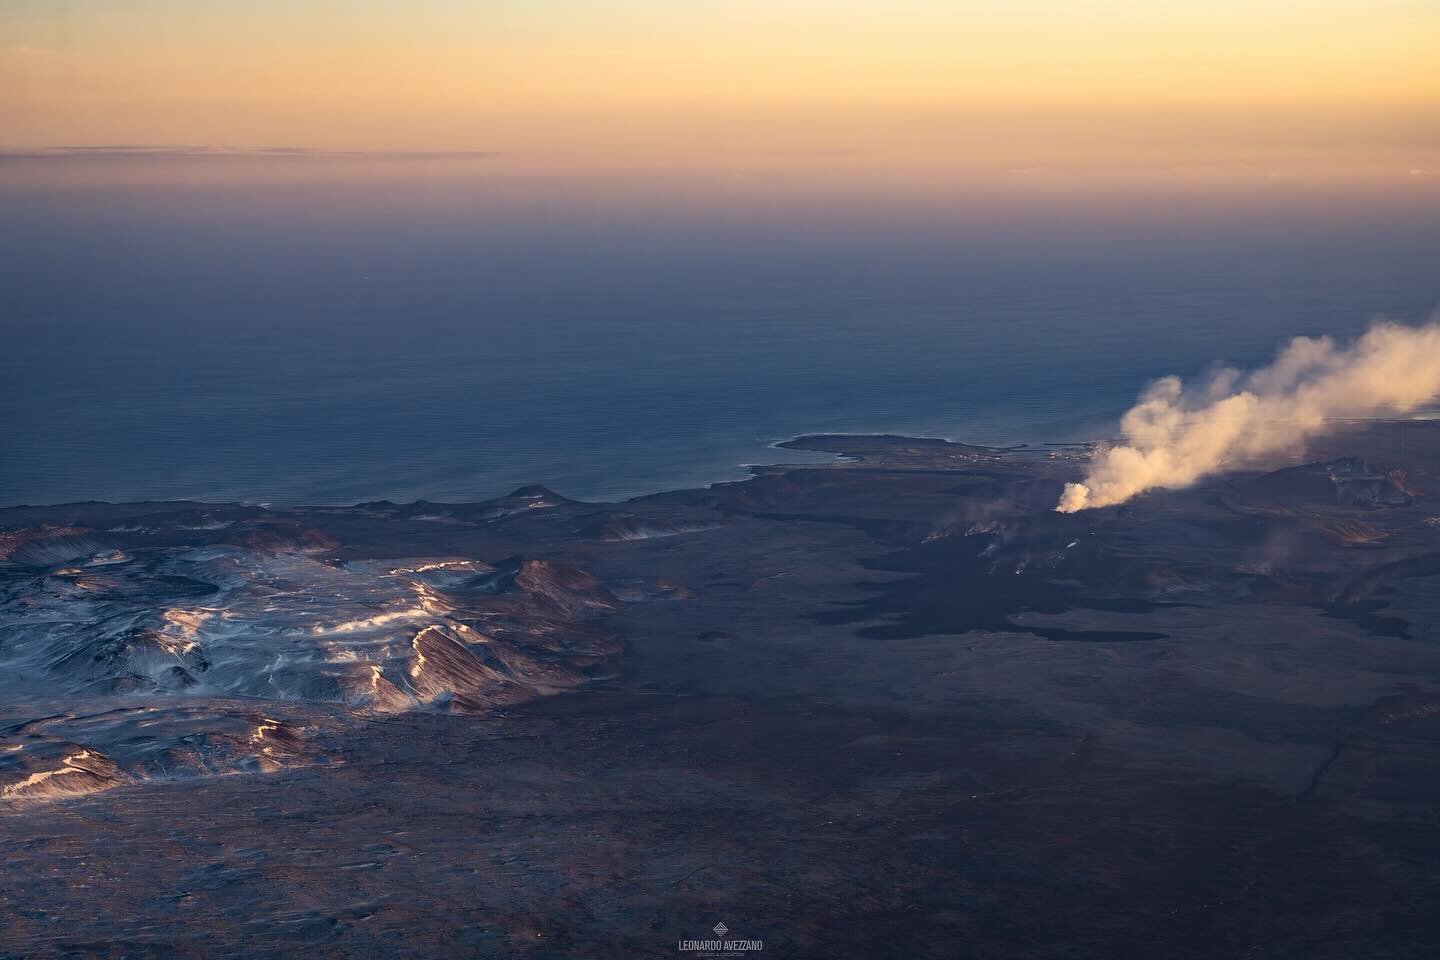 The sense of infinity of Iceland captured from the airplane while flying south. The contrast of the blue ocean and the sky in the golden hours, the moon rises while the volcano keeps spurring lava, flooding the area. 

(In the pictures: 1. 2. Grindav